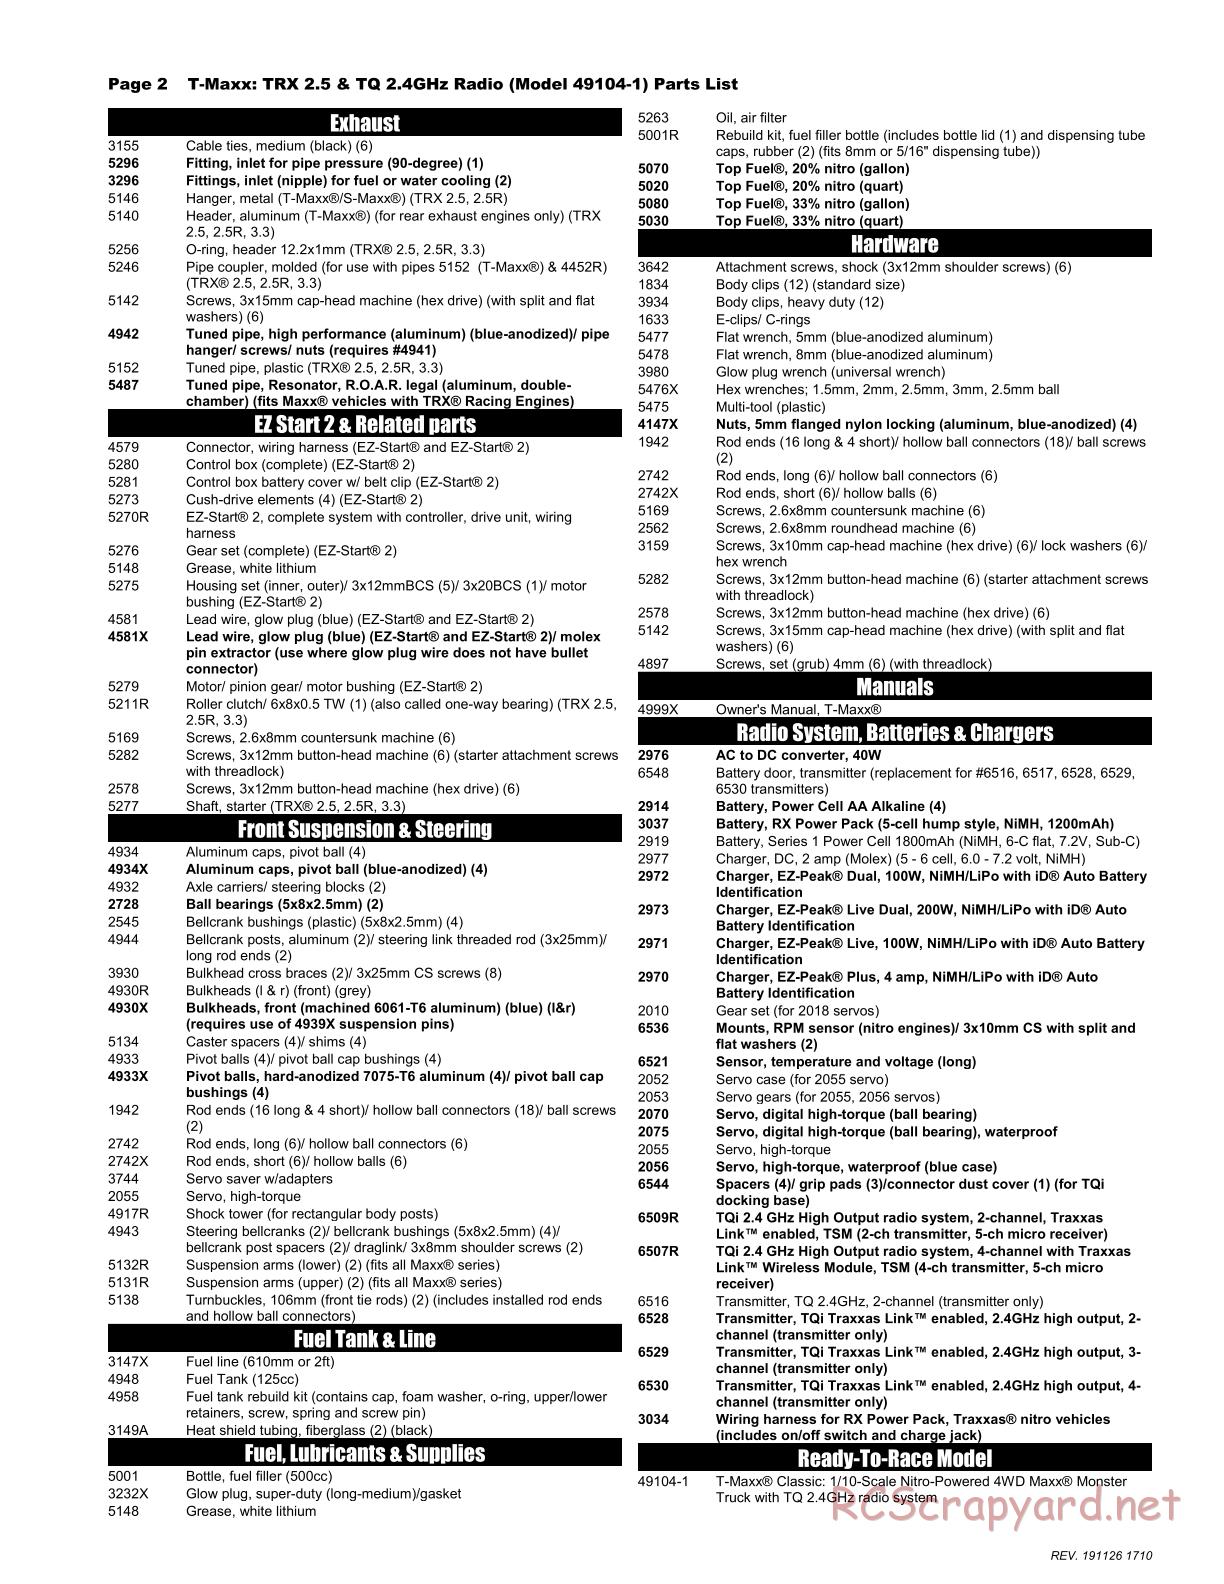 Traxxas - T-Maxx Classic - Parts List - Page 2